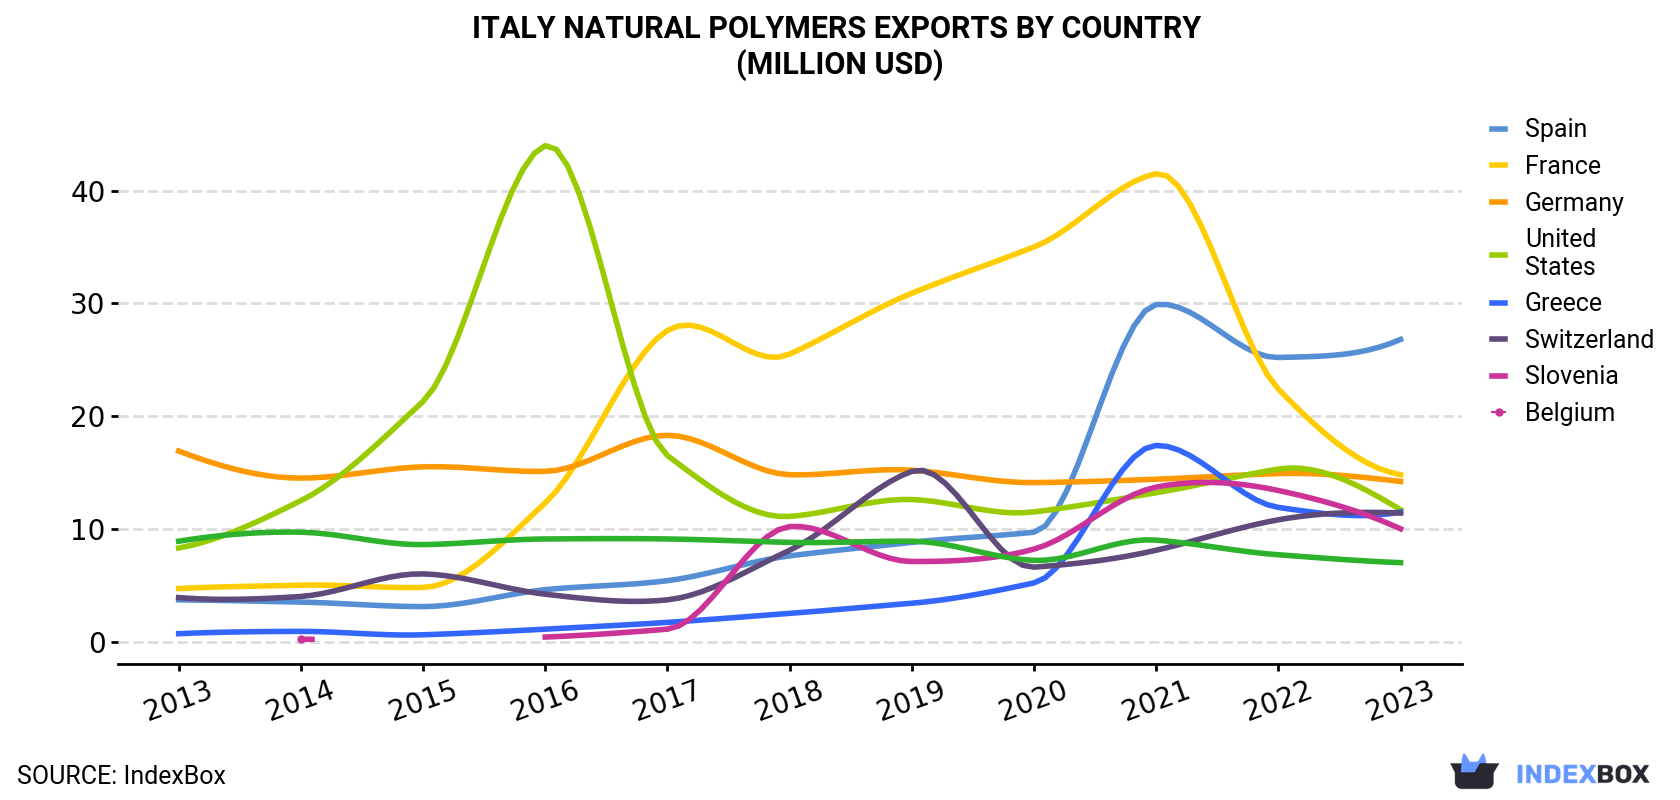 Italy Natural Polymers Exports By Country (Million USD)